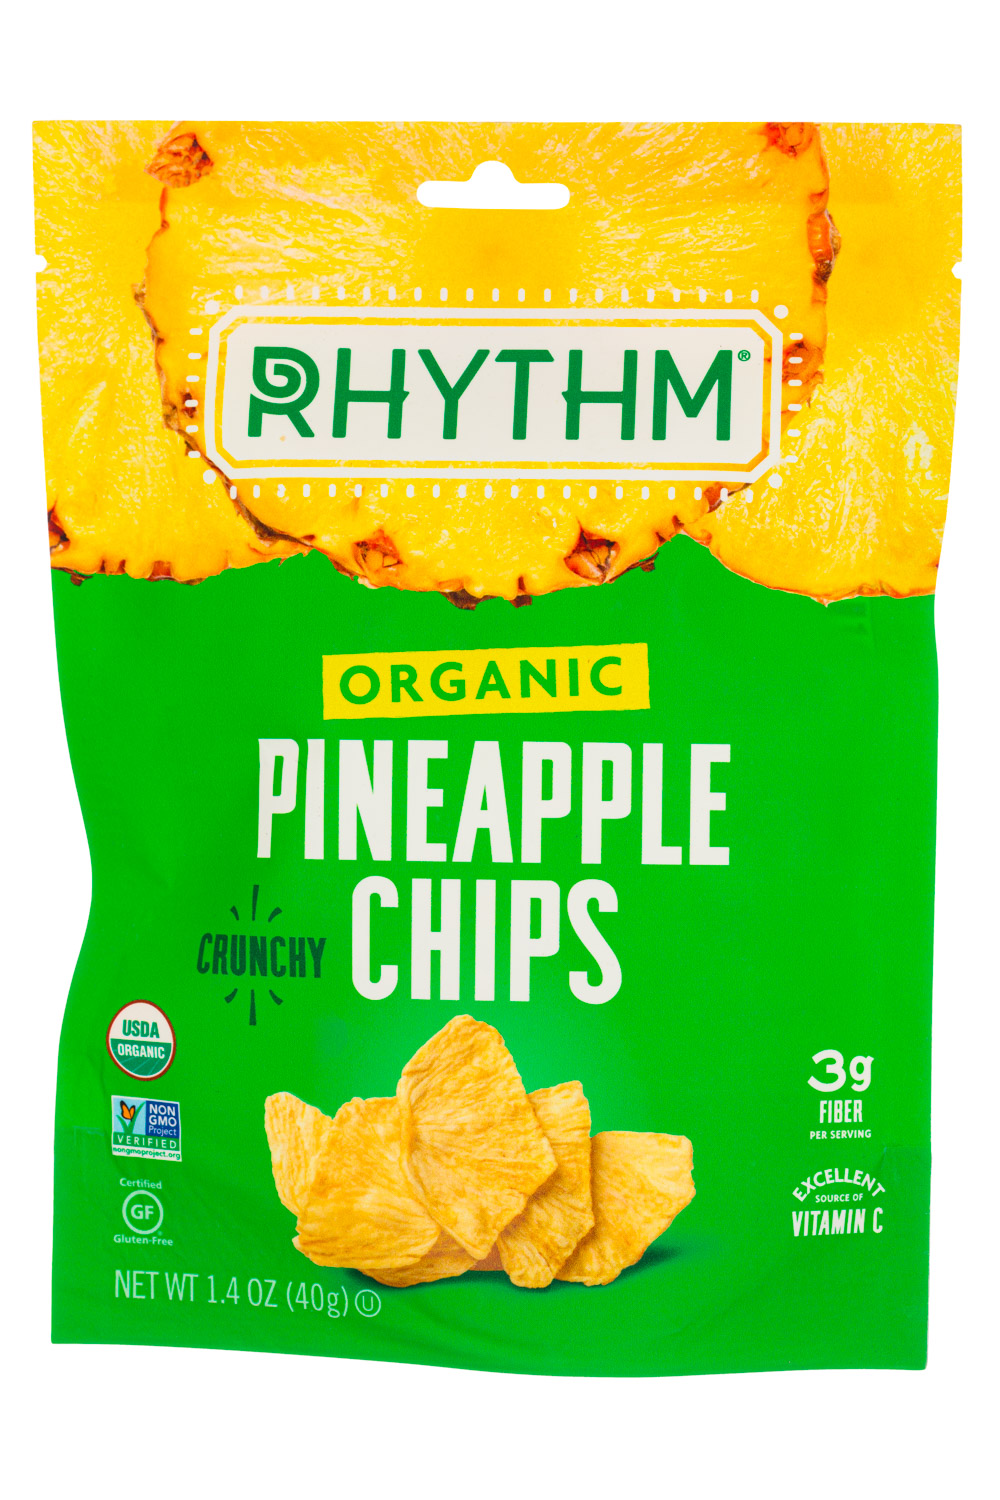 Pineapple Chips 2019